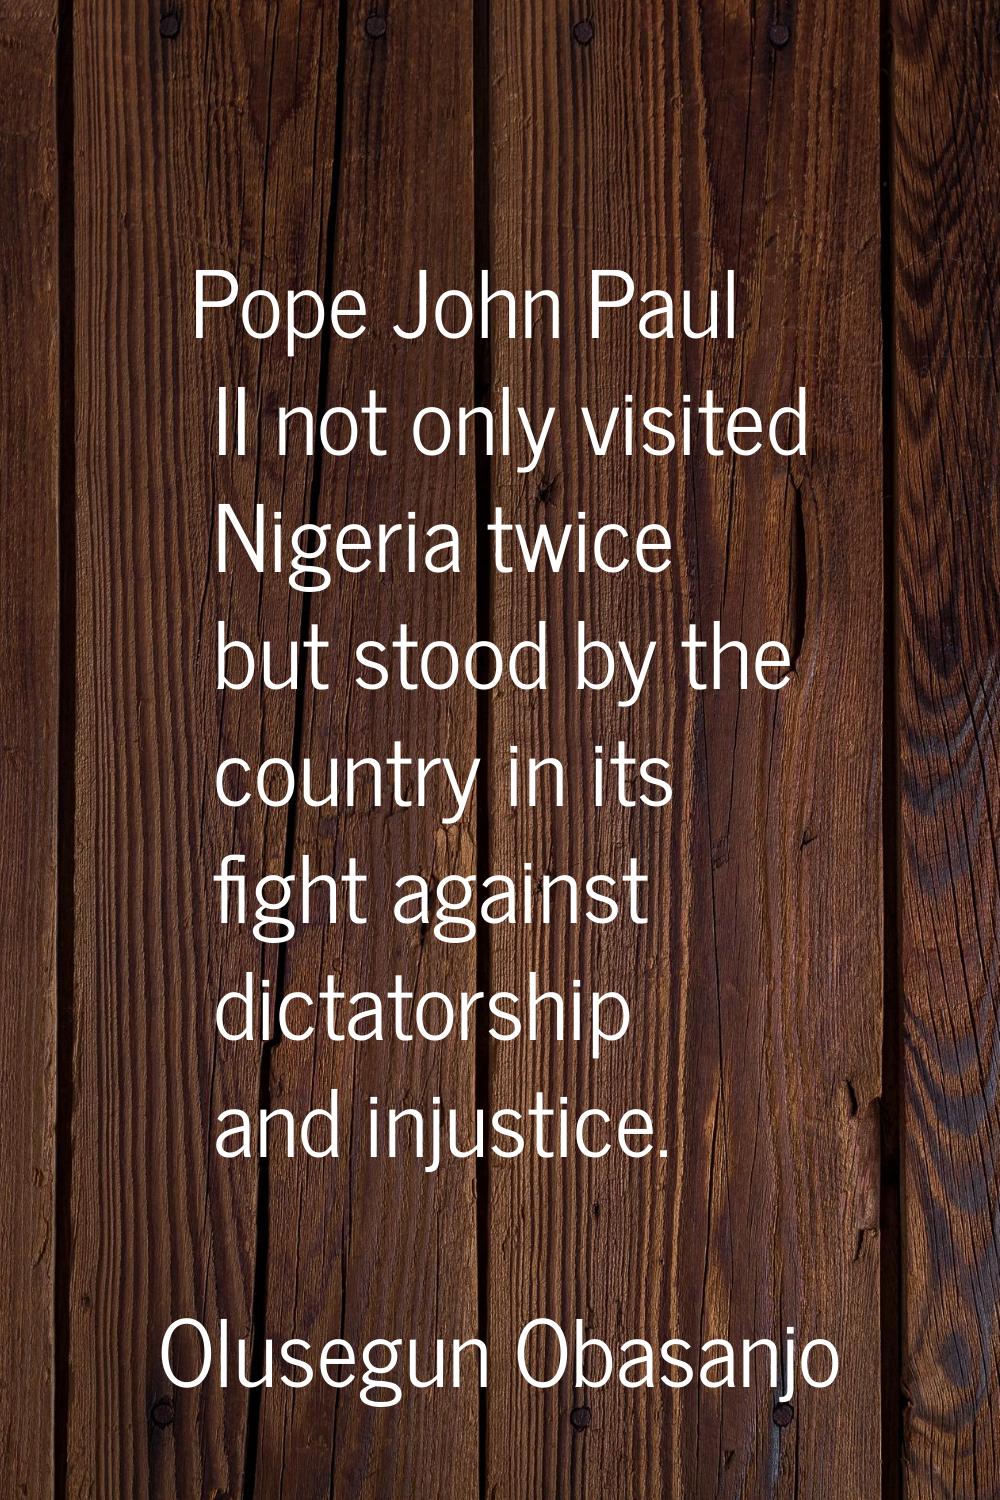 Pope John Paul II not only visited Nigeria twice but stood by the country in its fight against dict